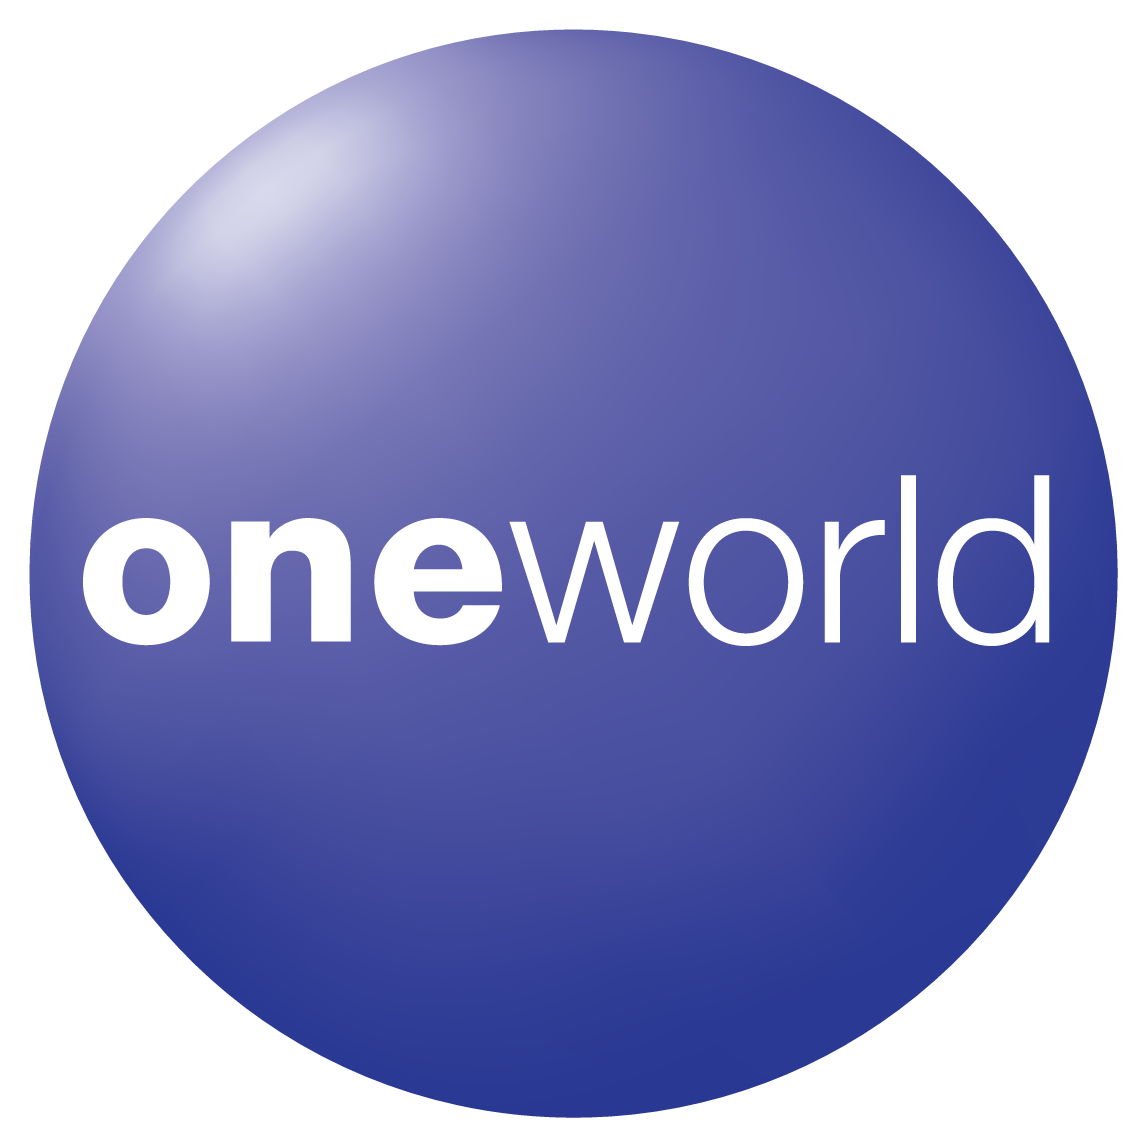 One world one word